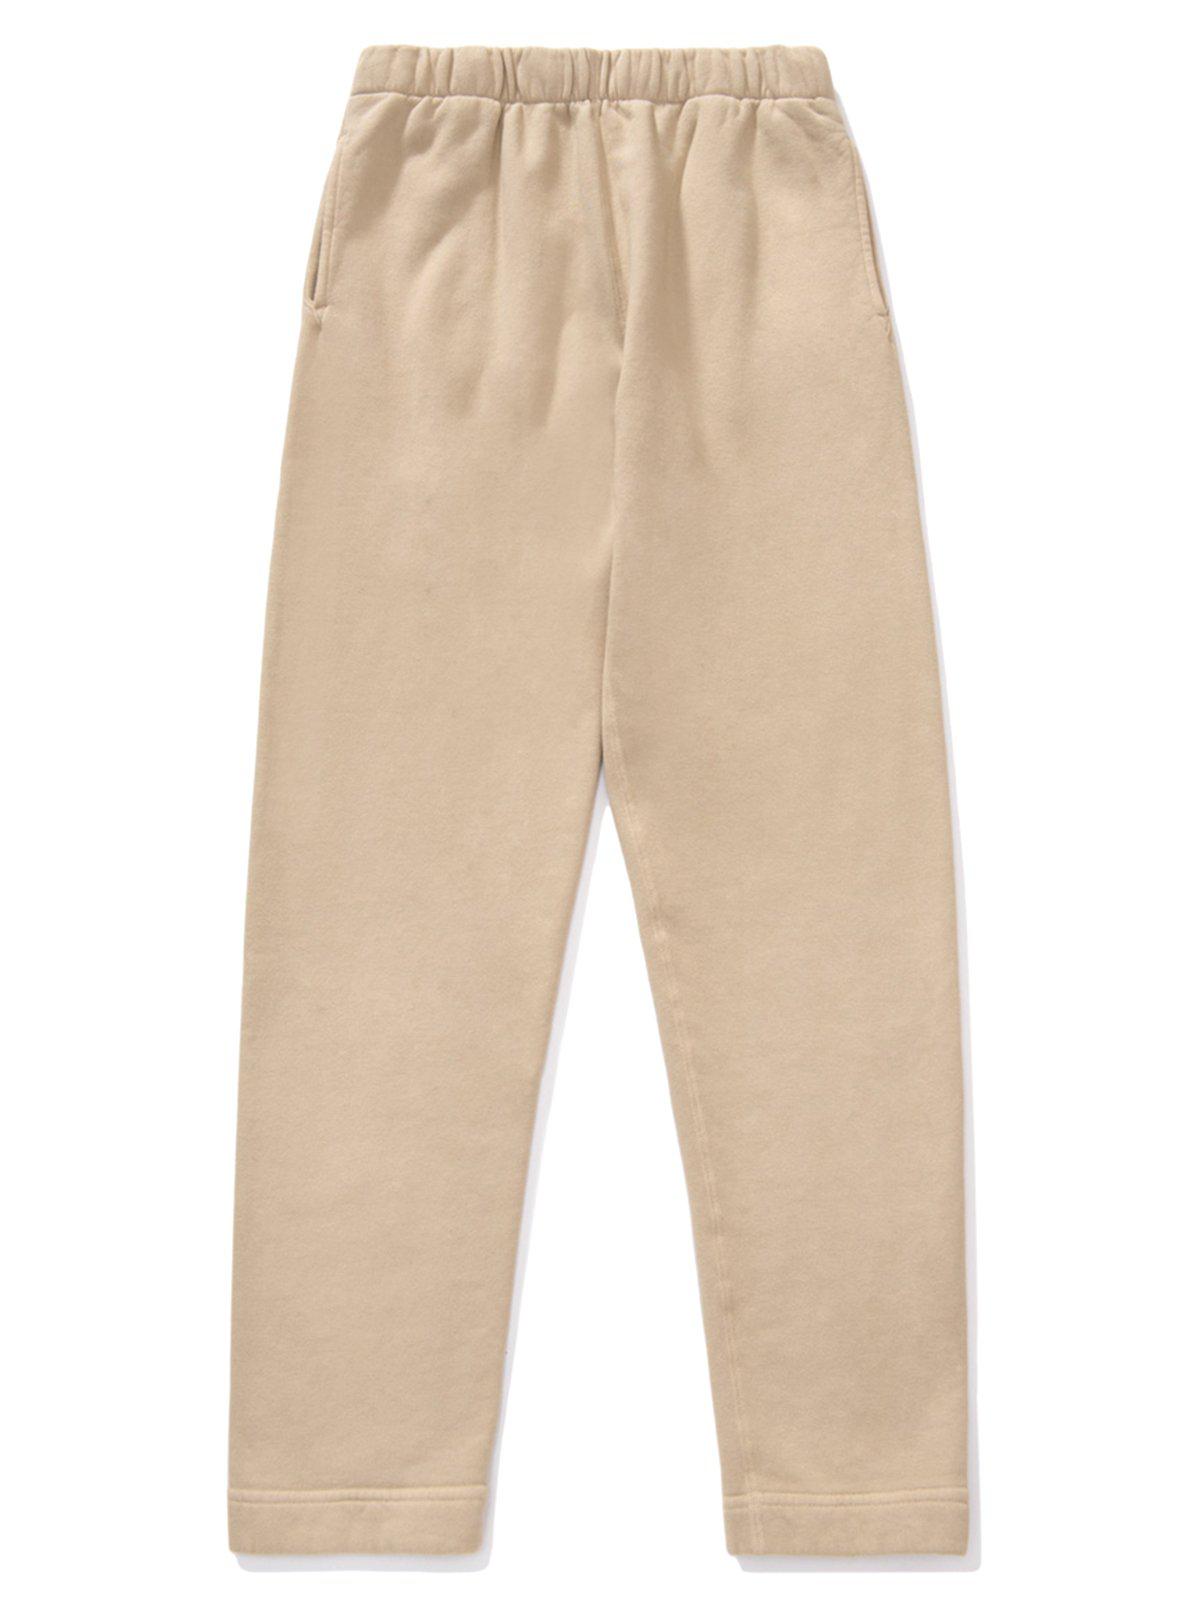 Lady White Co. Sweatpant Beige - MORE by Morello Indonesia